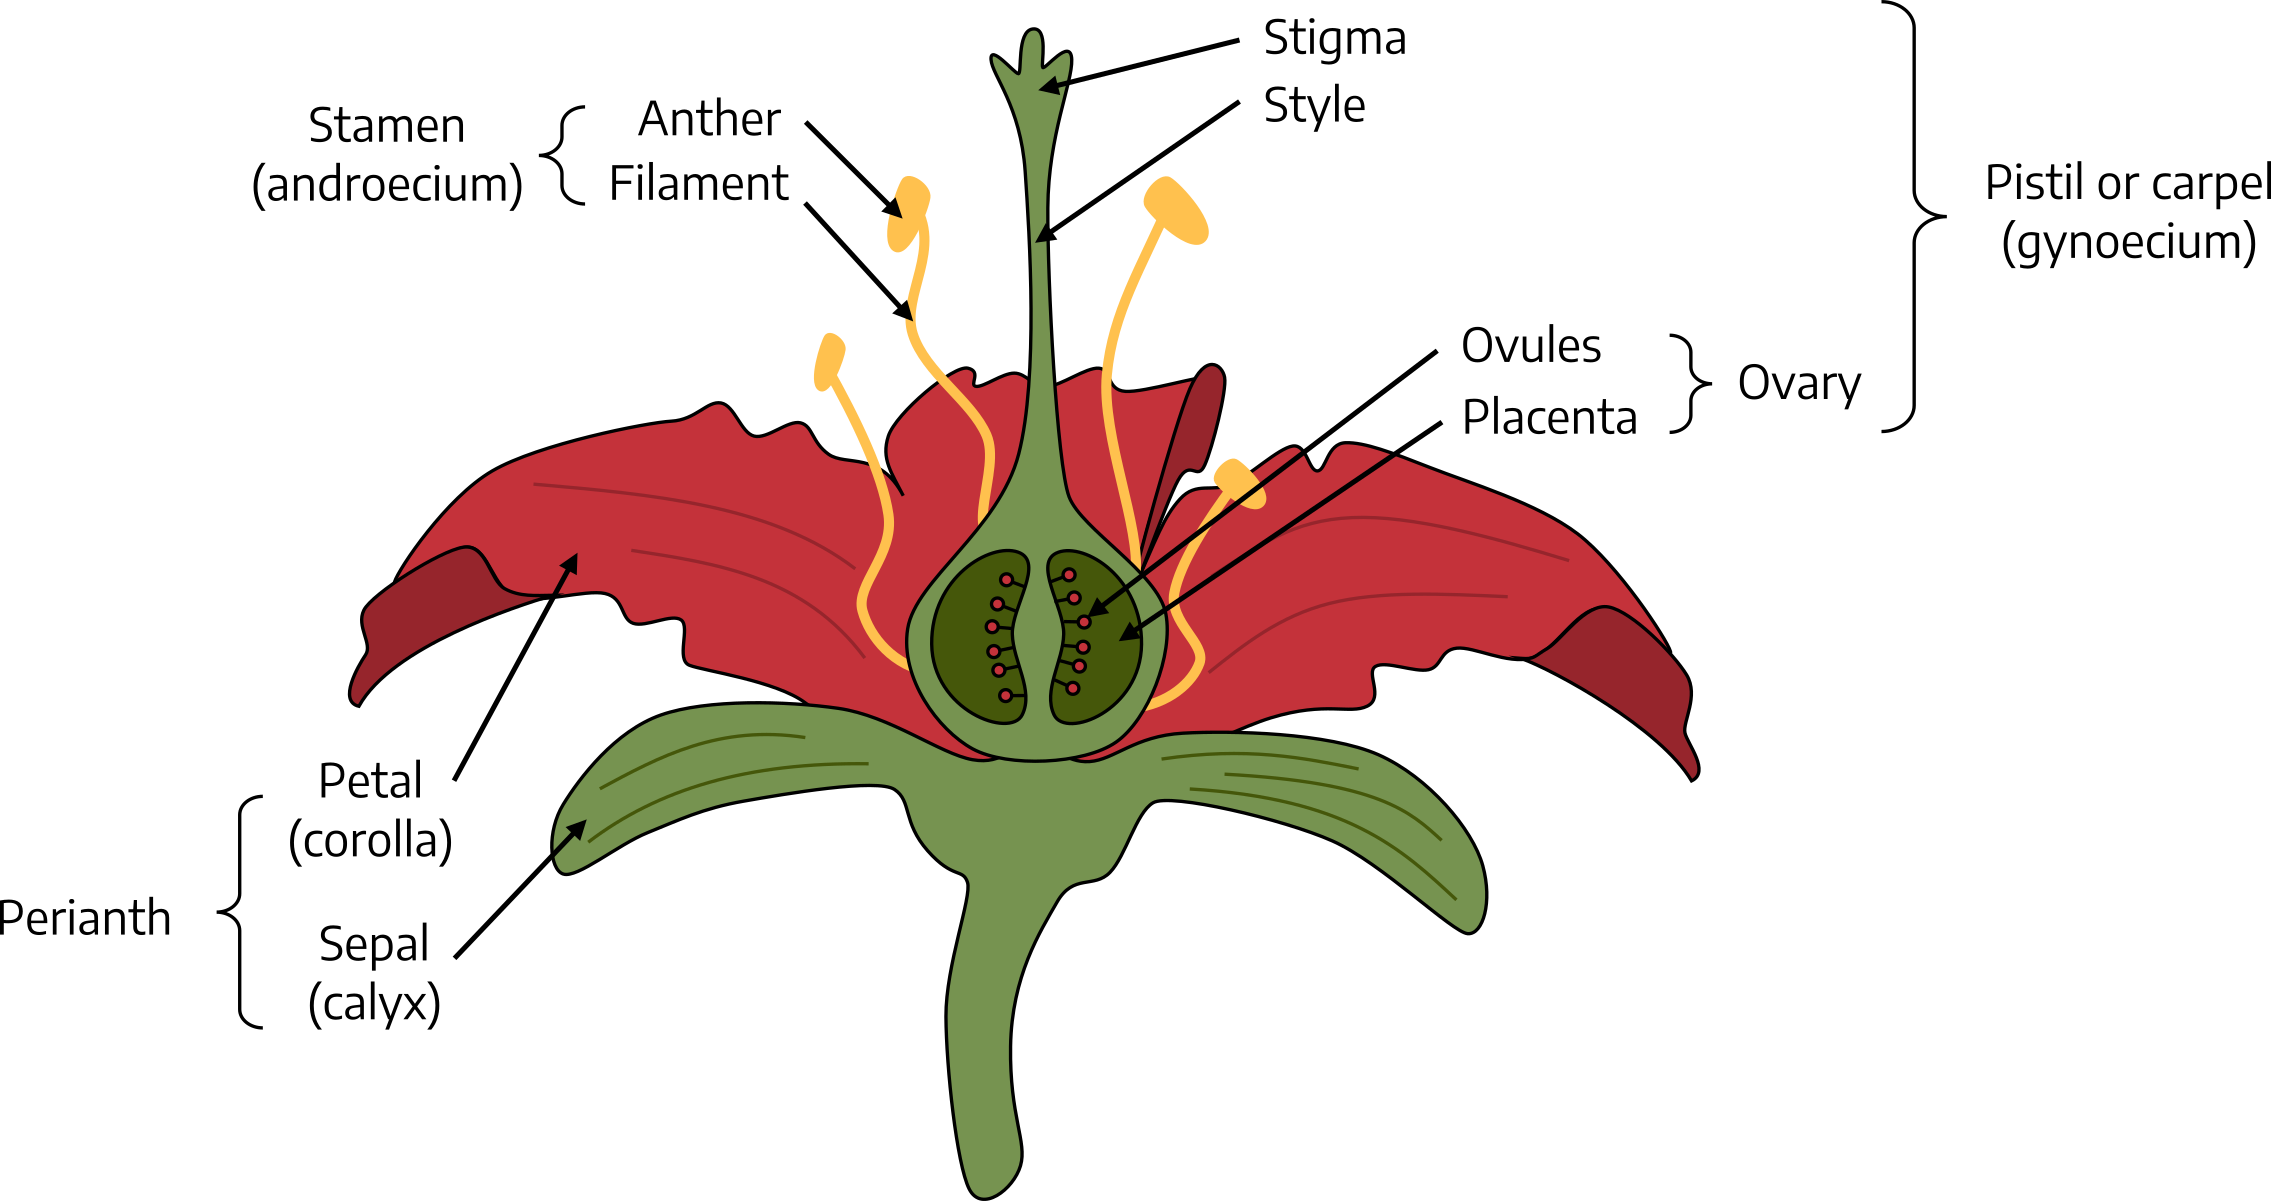 A diagram showing the parts of a flower that are described below in the next section labeled "Parts of a flower"